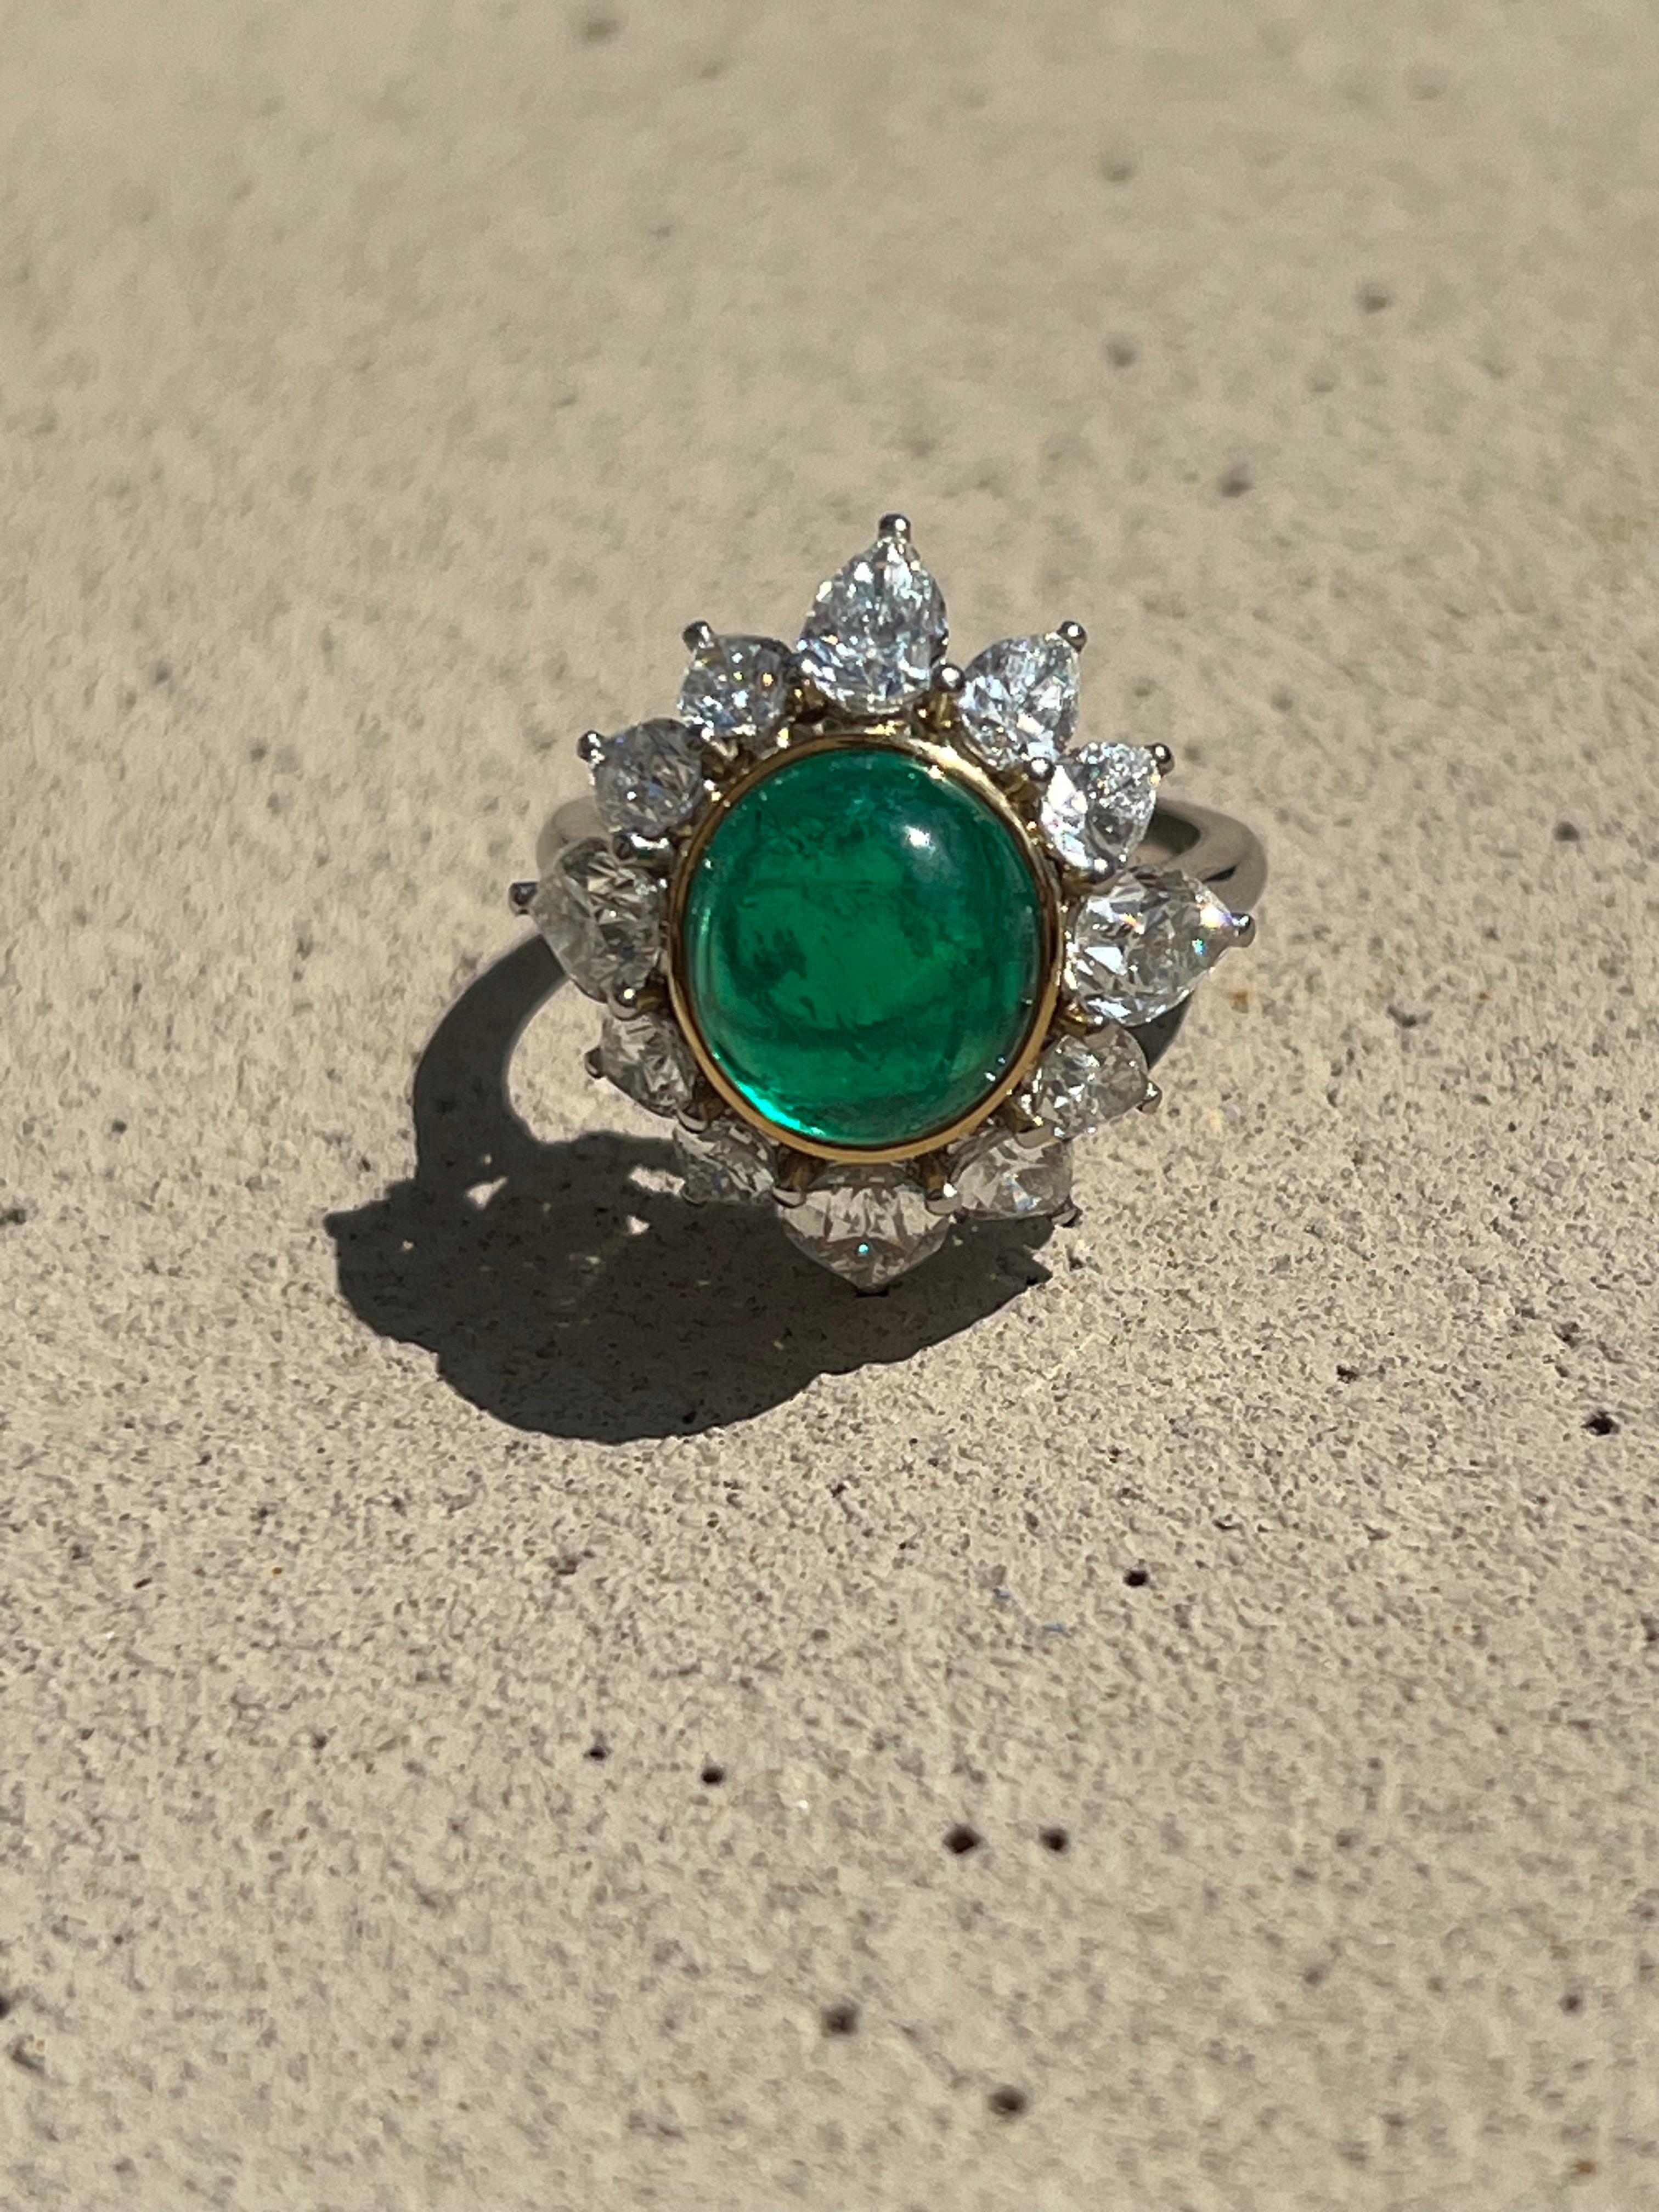 One hand crafted platinum and 18k yellow gold ring. The ring highlights one 3.65 carat cabochon cut Colombian emerald gemstone. The emerald gemstone measures 10.31 x 9.24 x 5.58 mm and shows a vibrant green color.
The emerald gemstone is accompanied